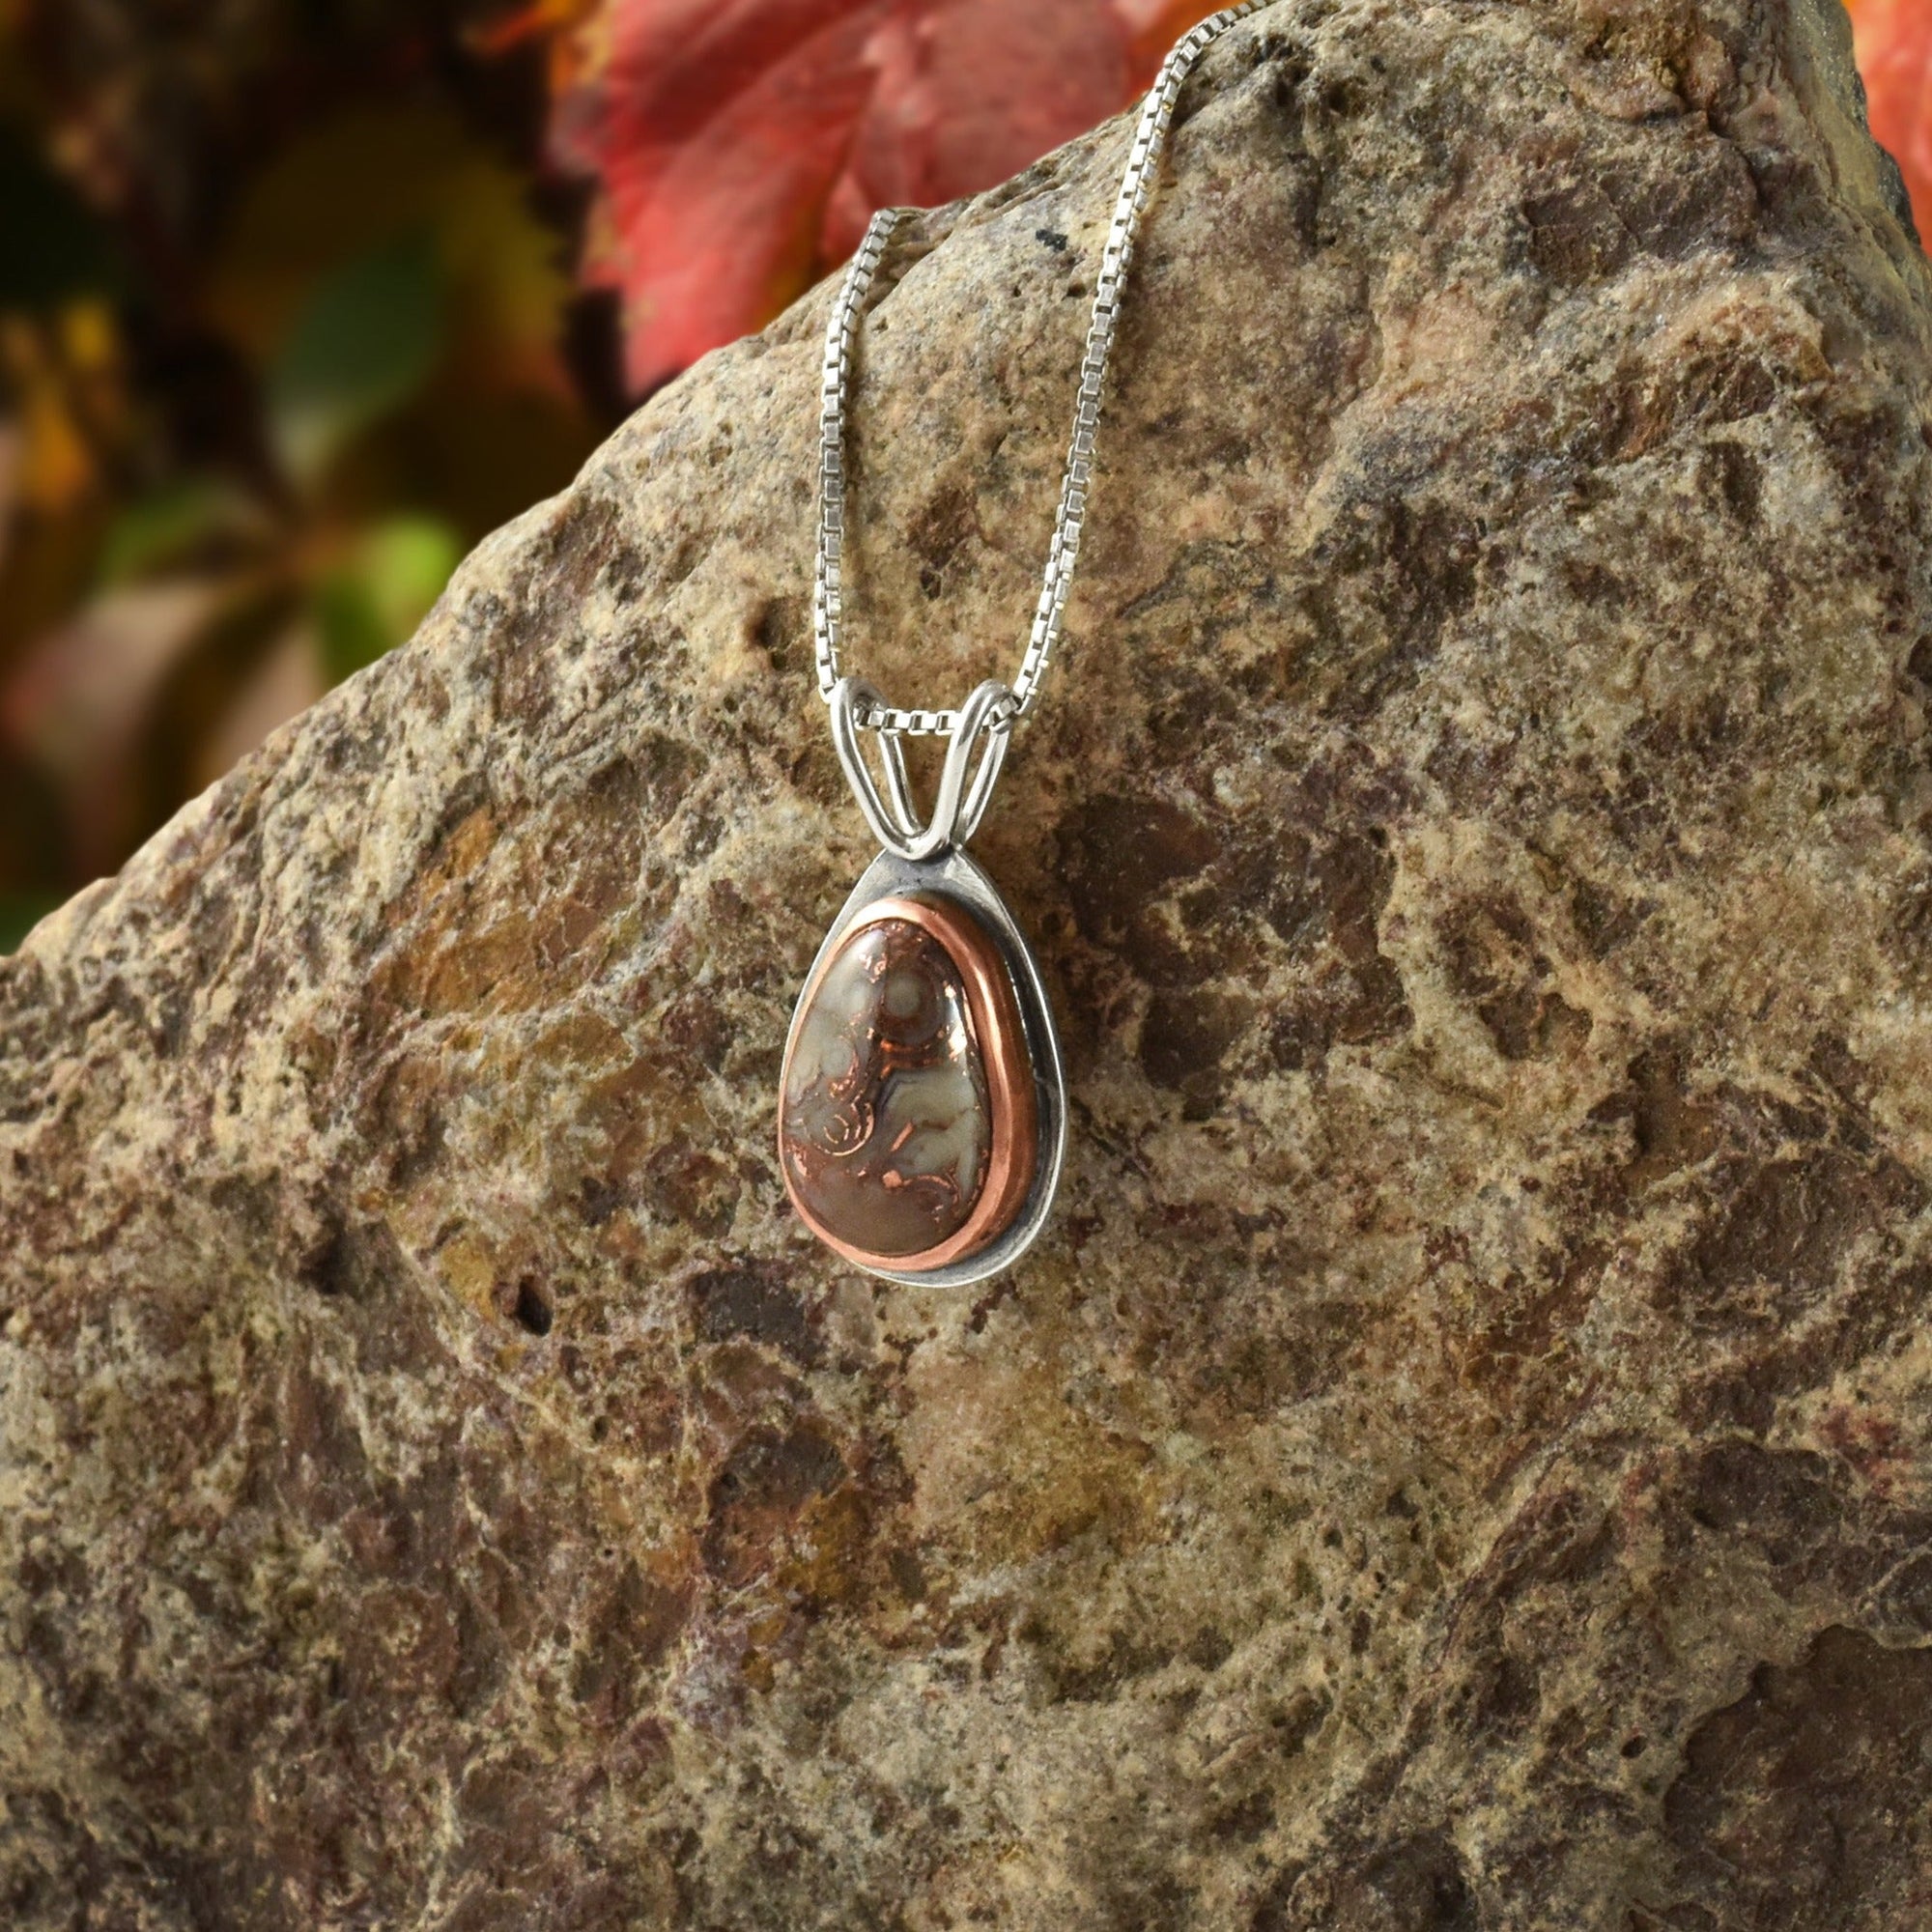 Copper Set Lake Superior Copper Agate Drop Pendant No. 4, Mixed Metal Pendant handmade by Beth Millner Jewelry